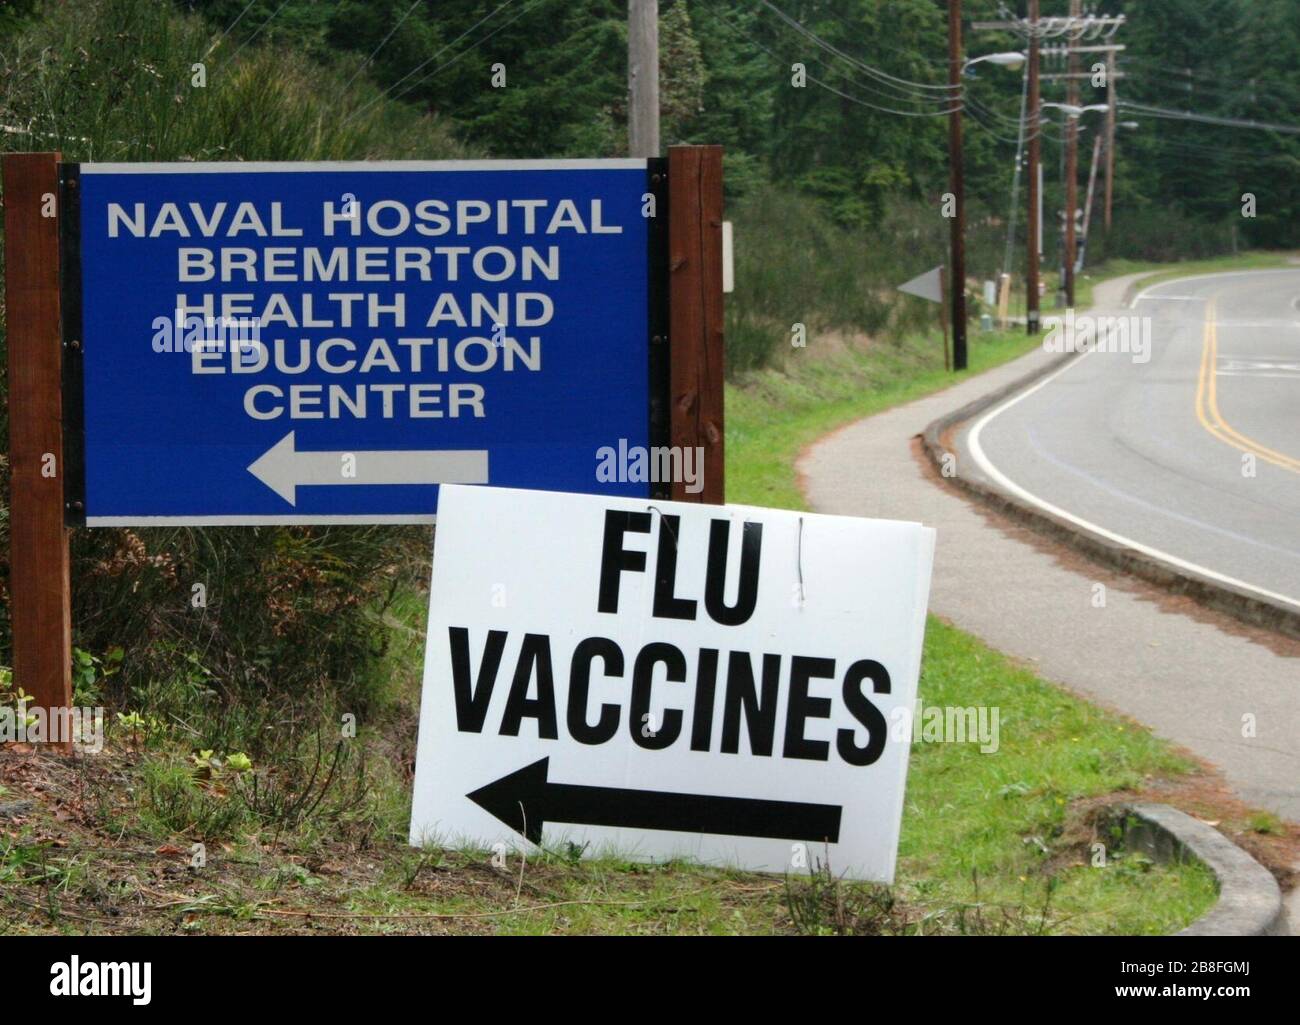 Giving it your best shot - Naval Hospital Bremerton offers Flu Vaccination Clinic 151028 Stock Photo